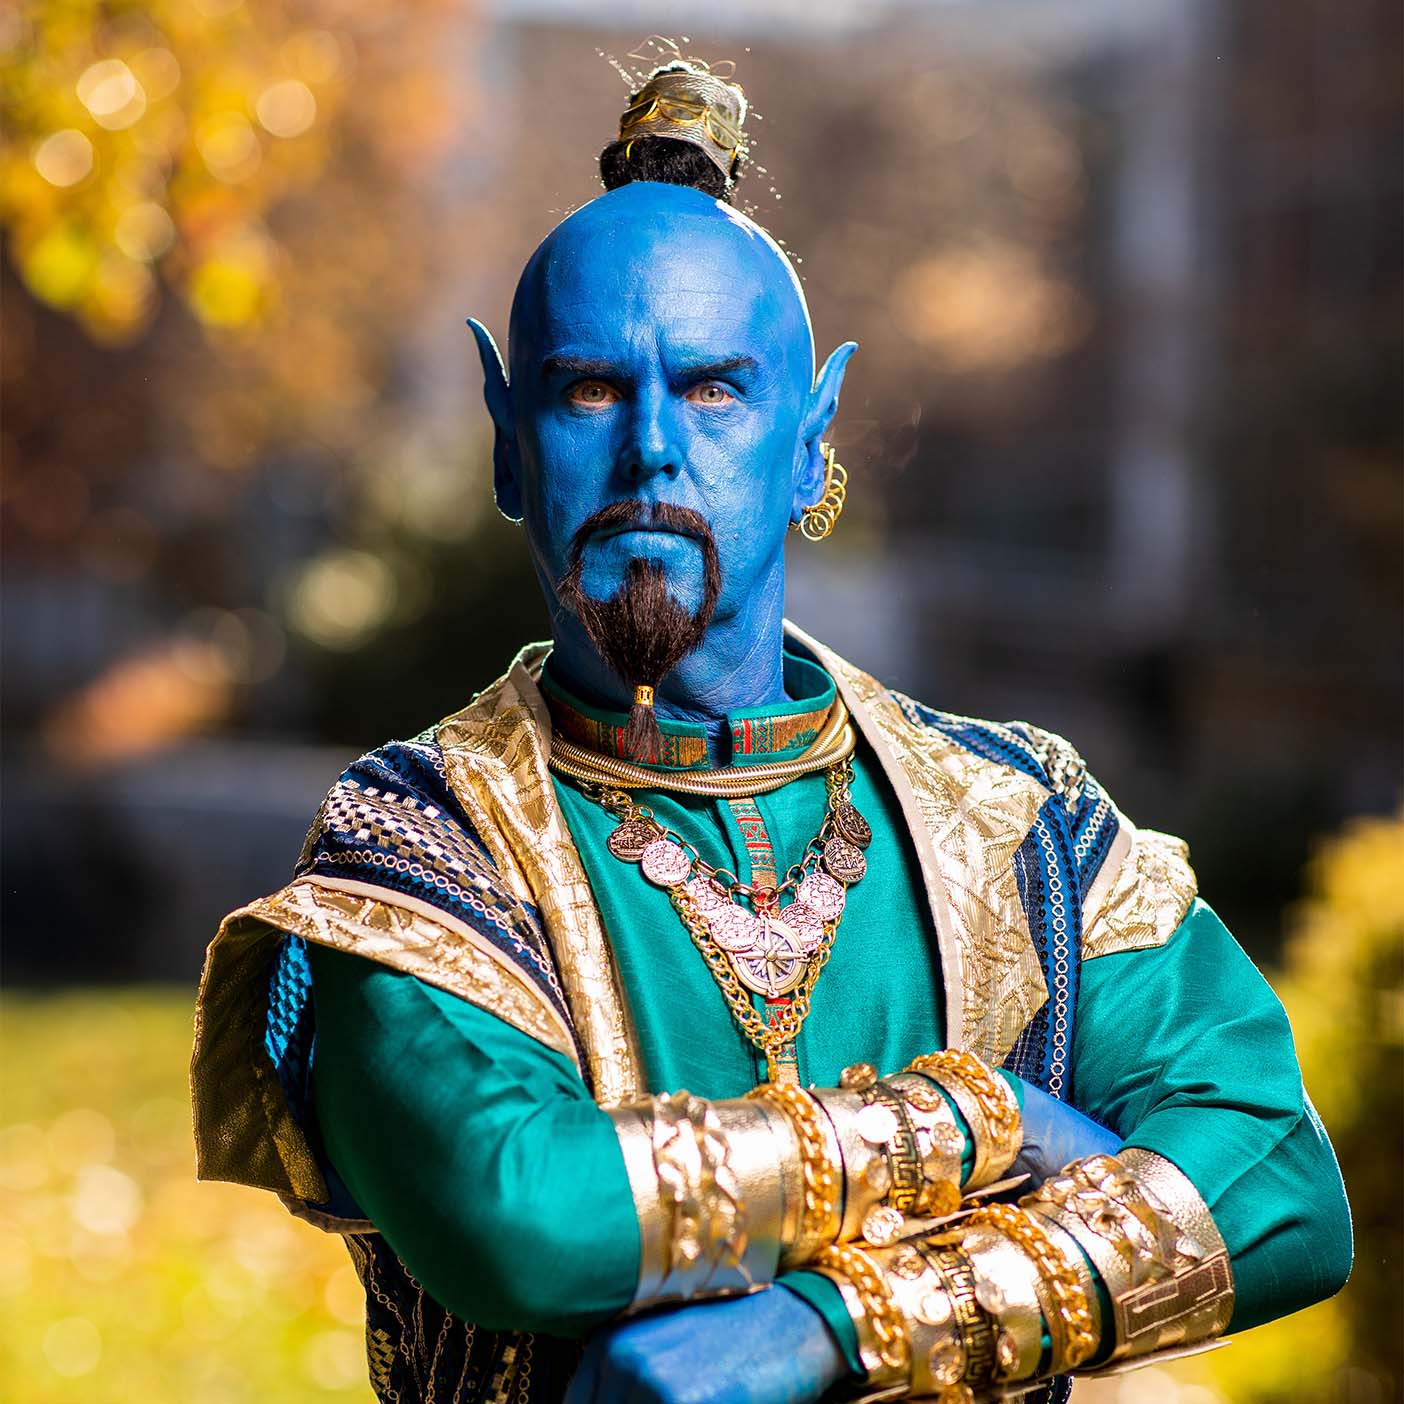 Tom Holmoe dressed up as the Aladdin's blue Genie for Halloween.